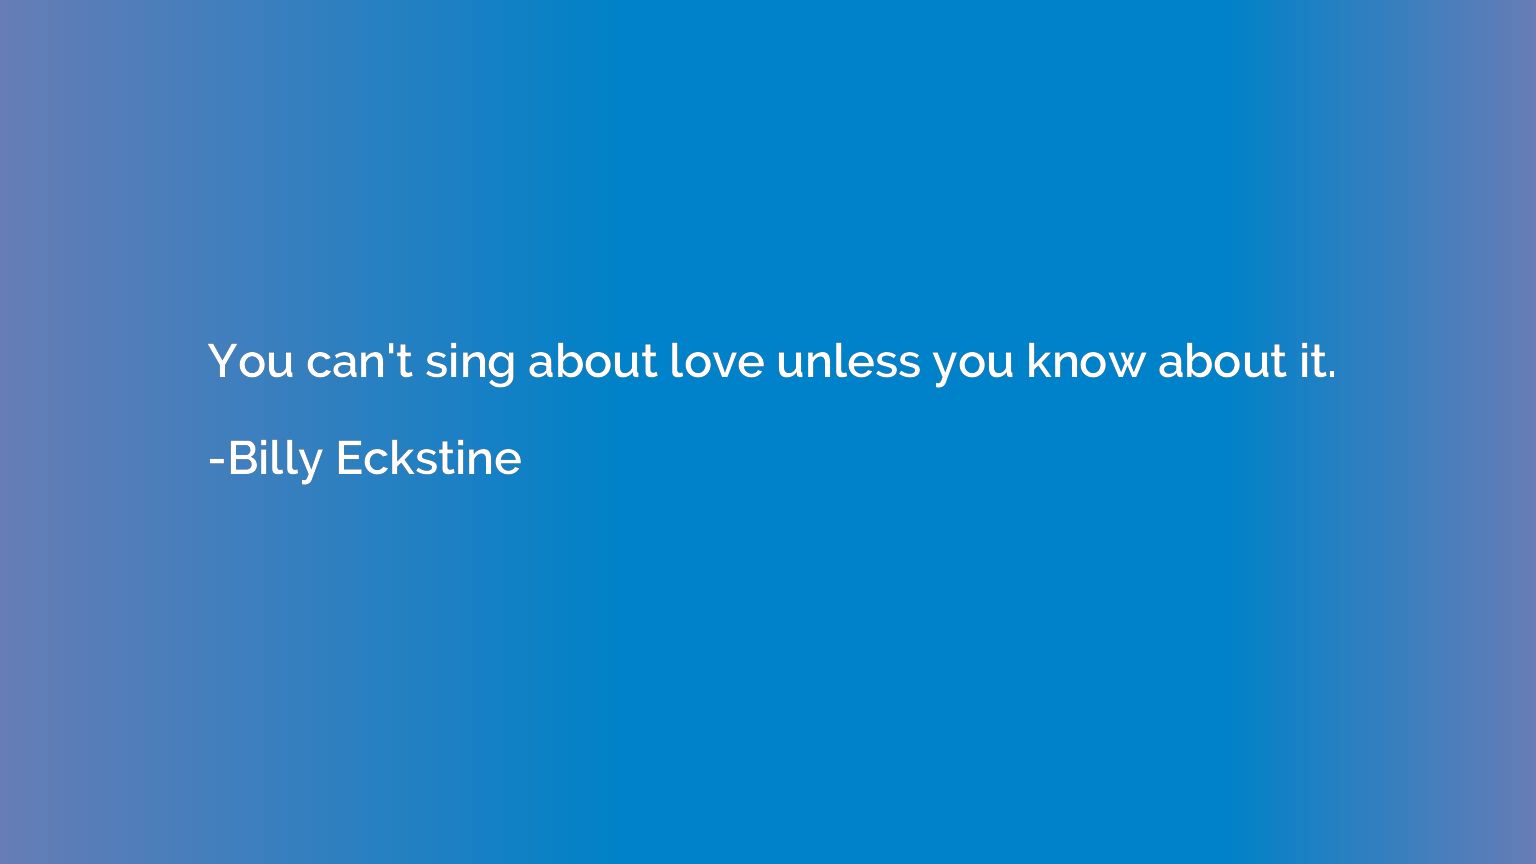 You can't sing about love unless you know about it.